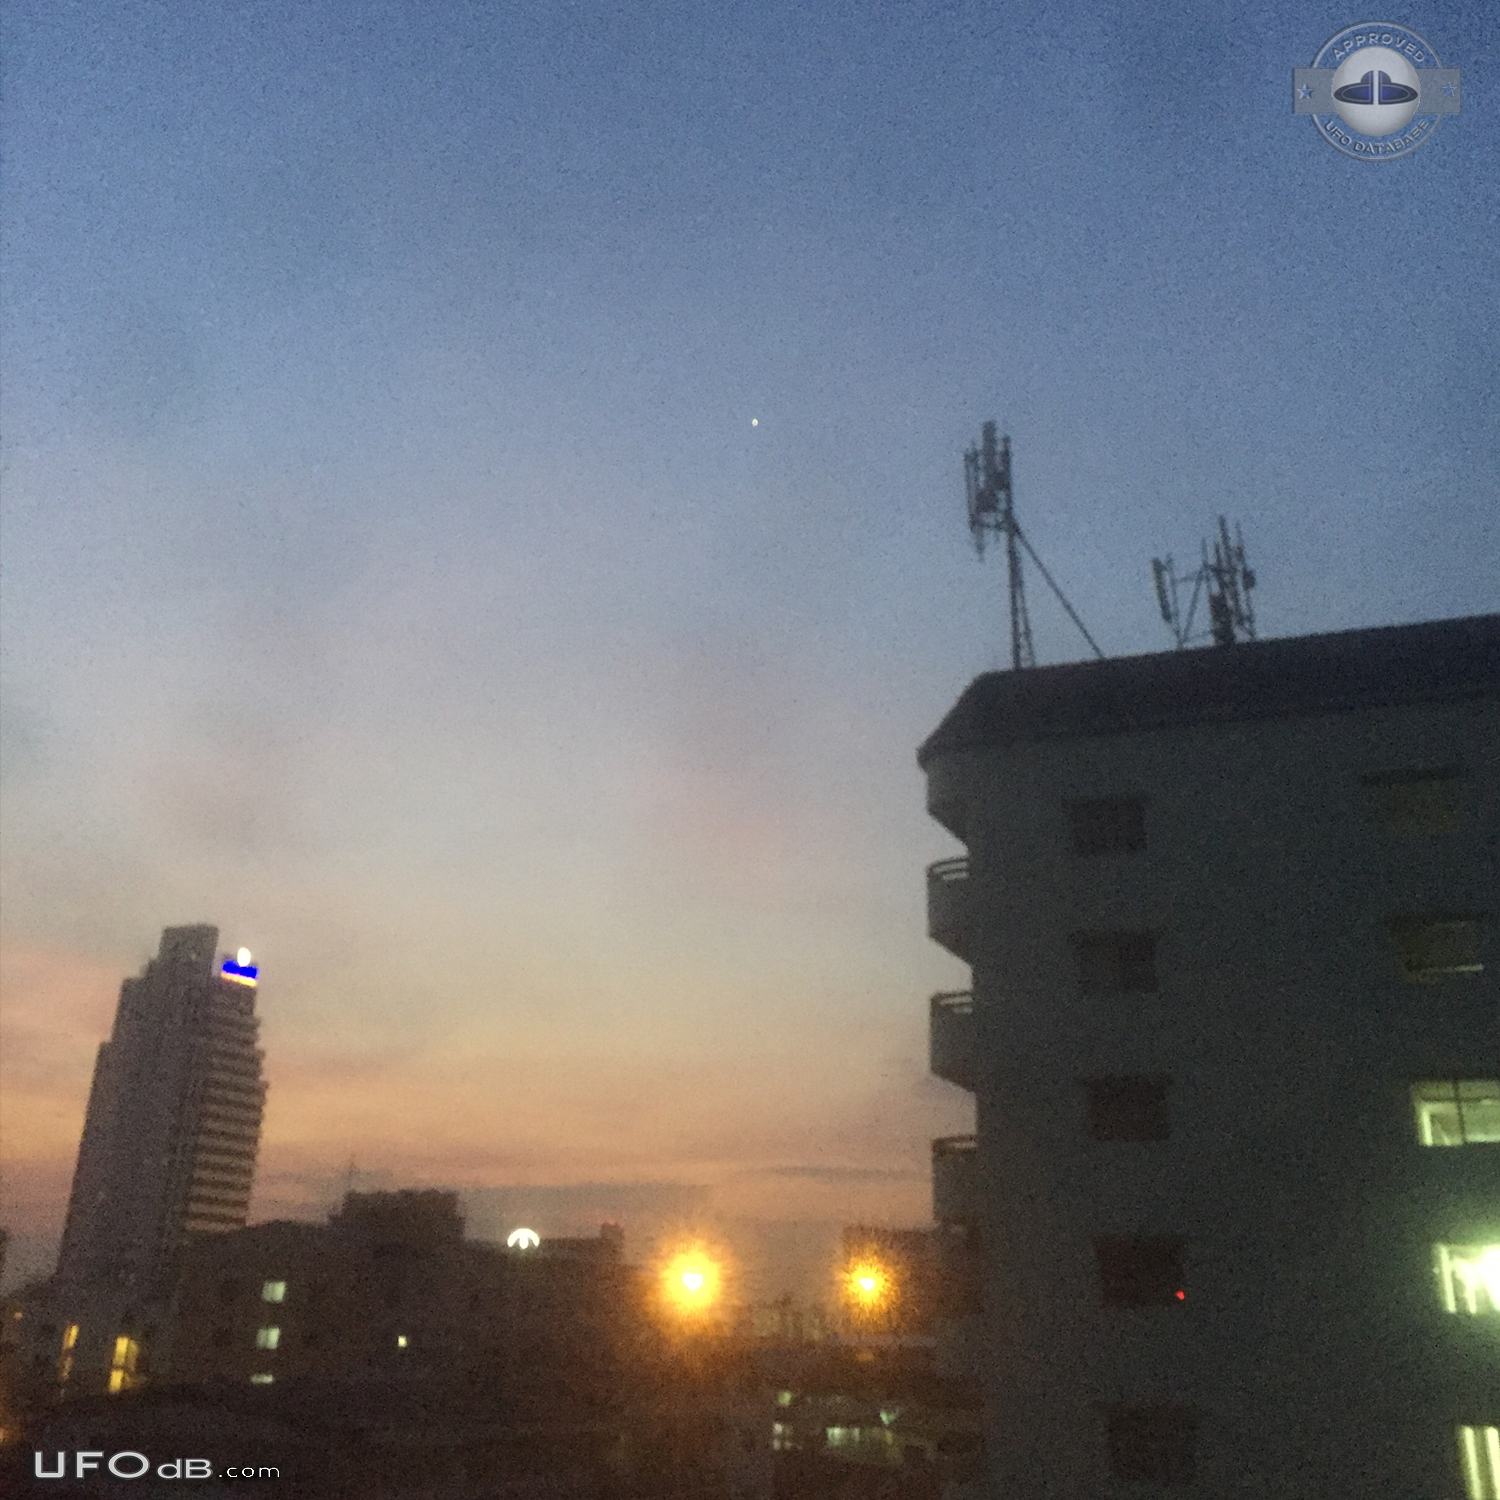 Very bright UFO seemed to have tentacles - Bangkok Thailand 2017 UFO Picture #805-1